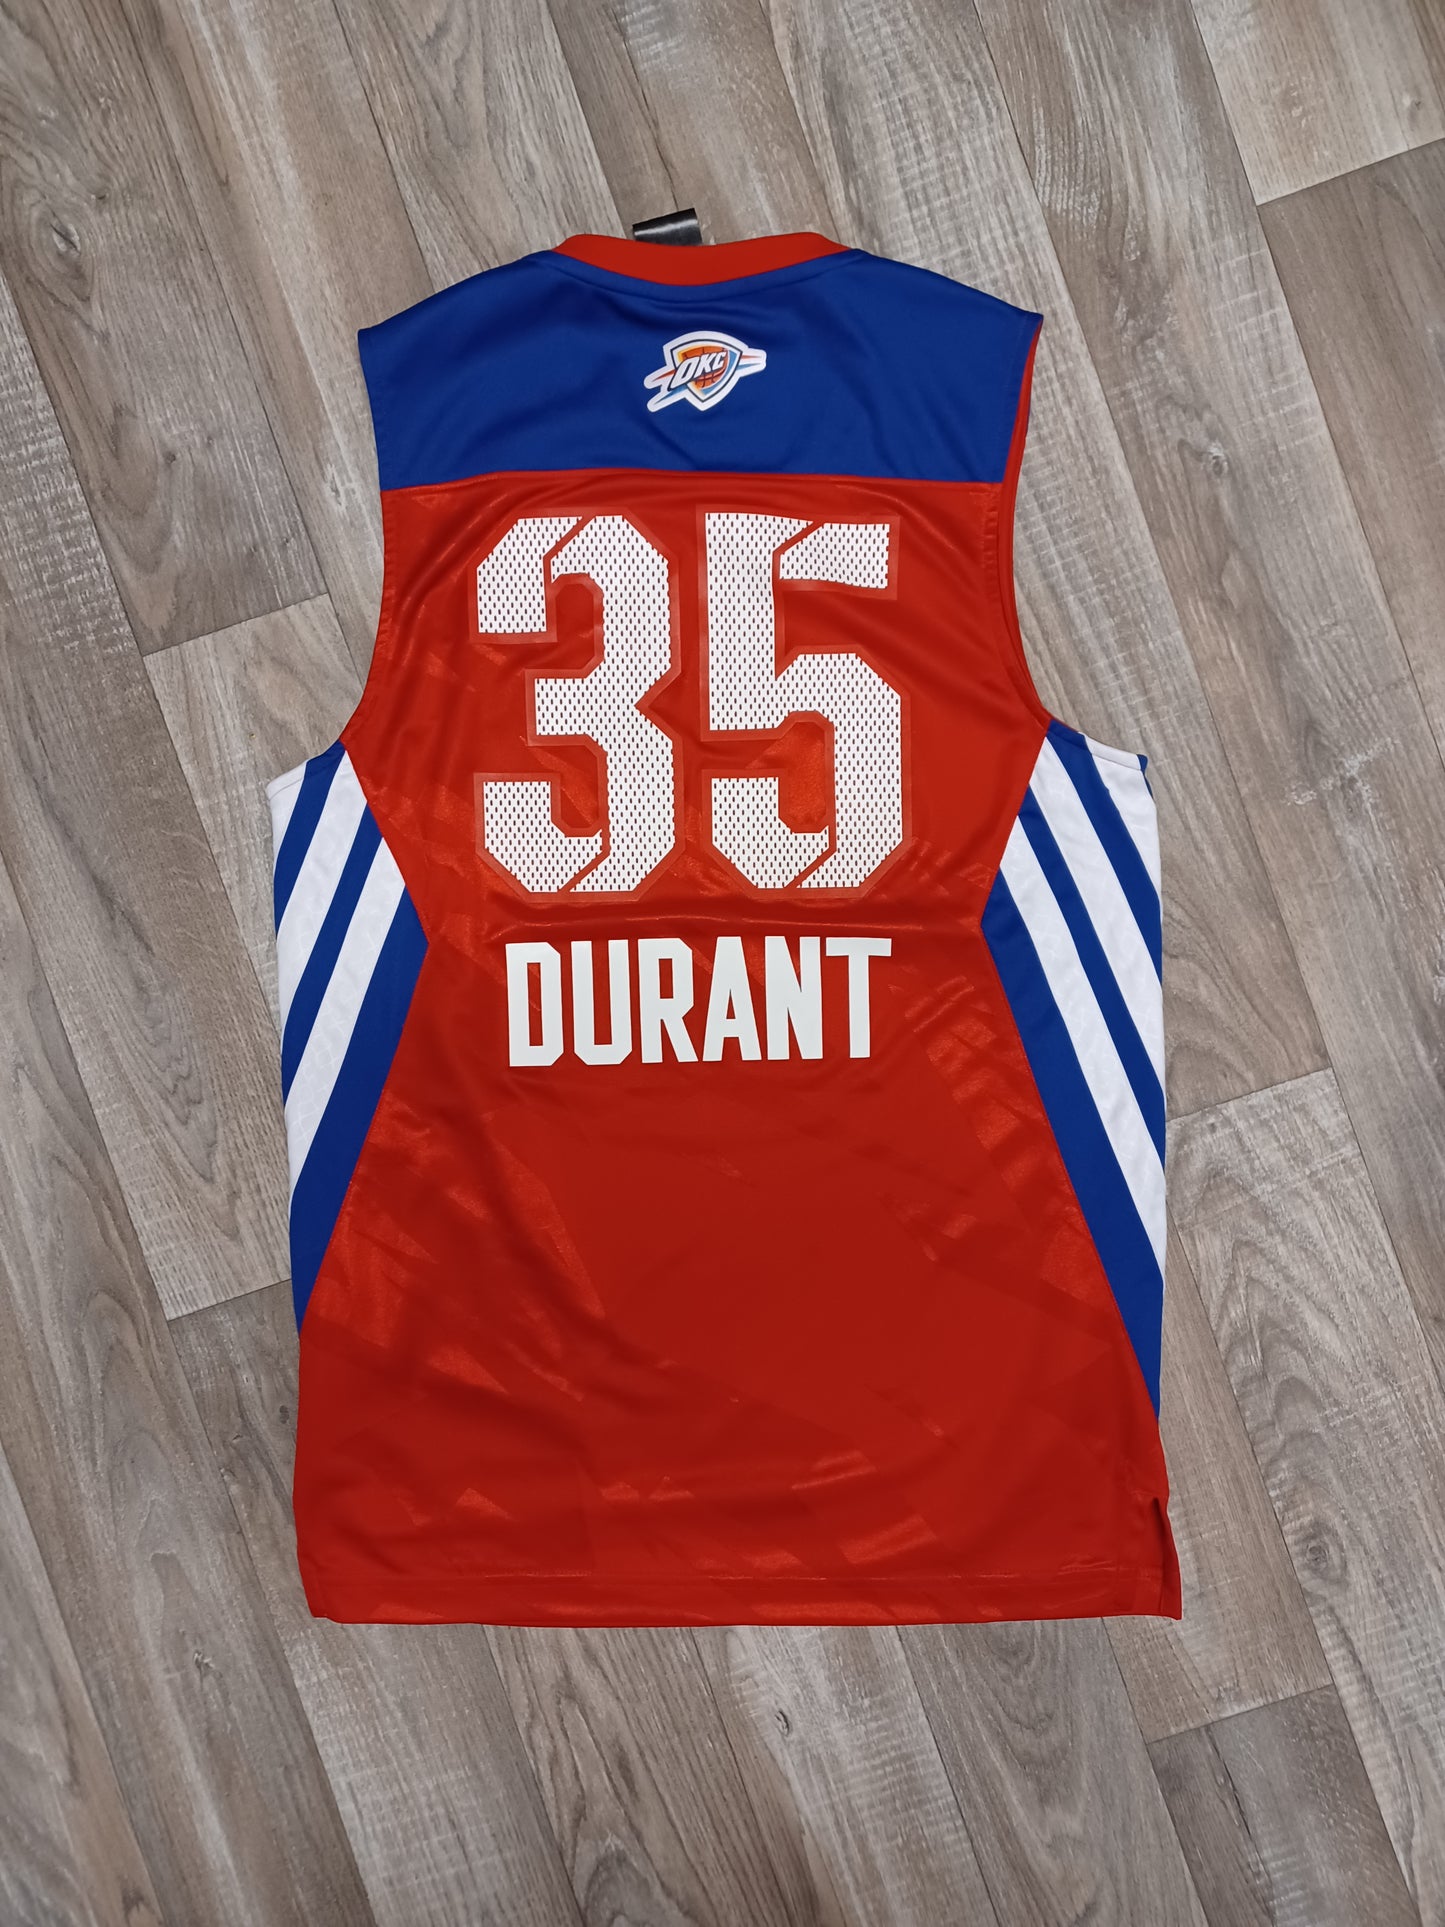 Kevin Durant NBA All Star 2013 Jersey Size Small